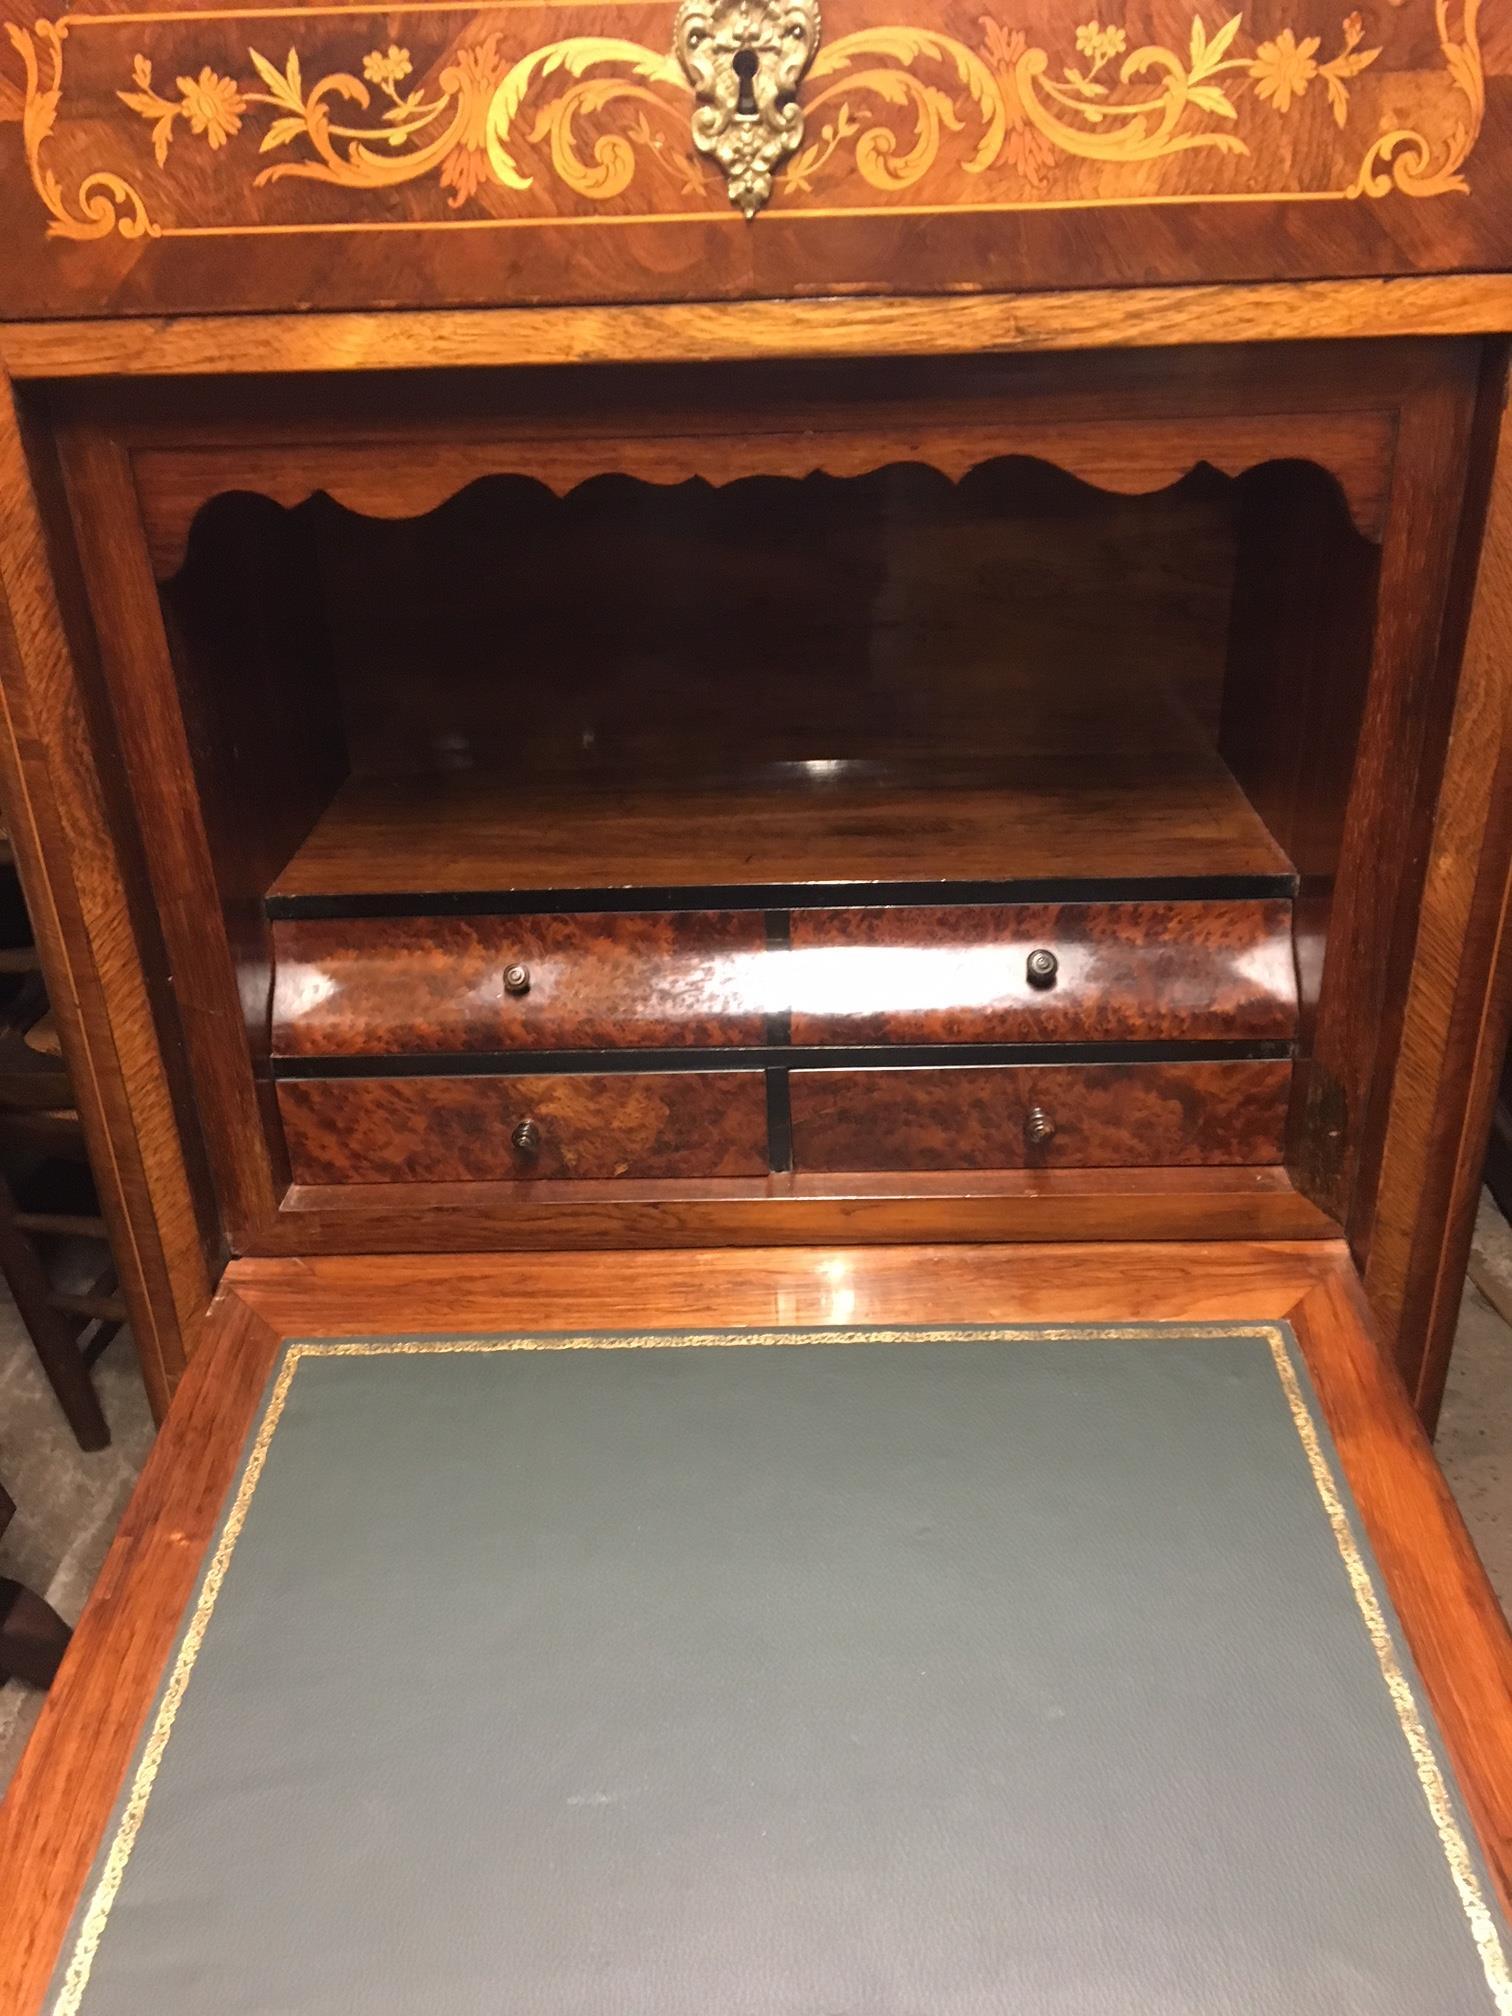 Good quality marquetry Semanier with ormolu fittings in good condition. French Circa 1910. 
This delightful antique Semanier has 4 smoothly running drawers below the central marquetry panel, This drop-down panel opens to reveal 3 stationary drawers